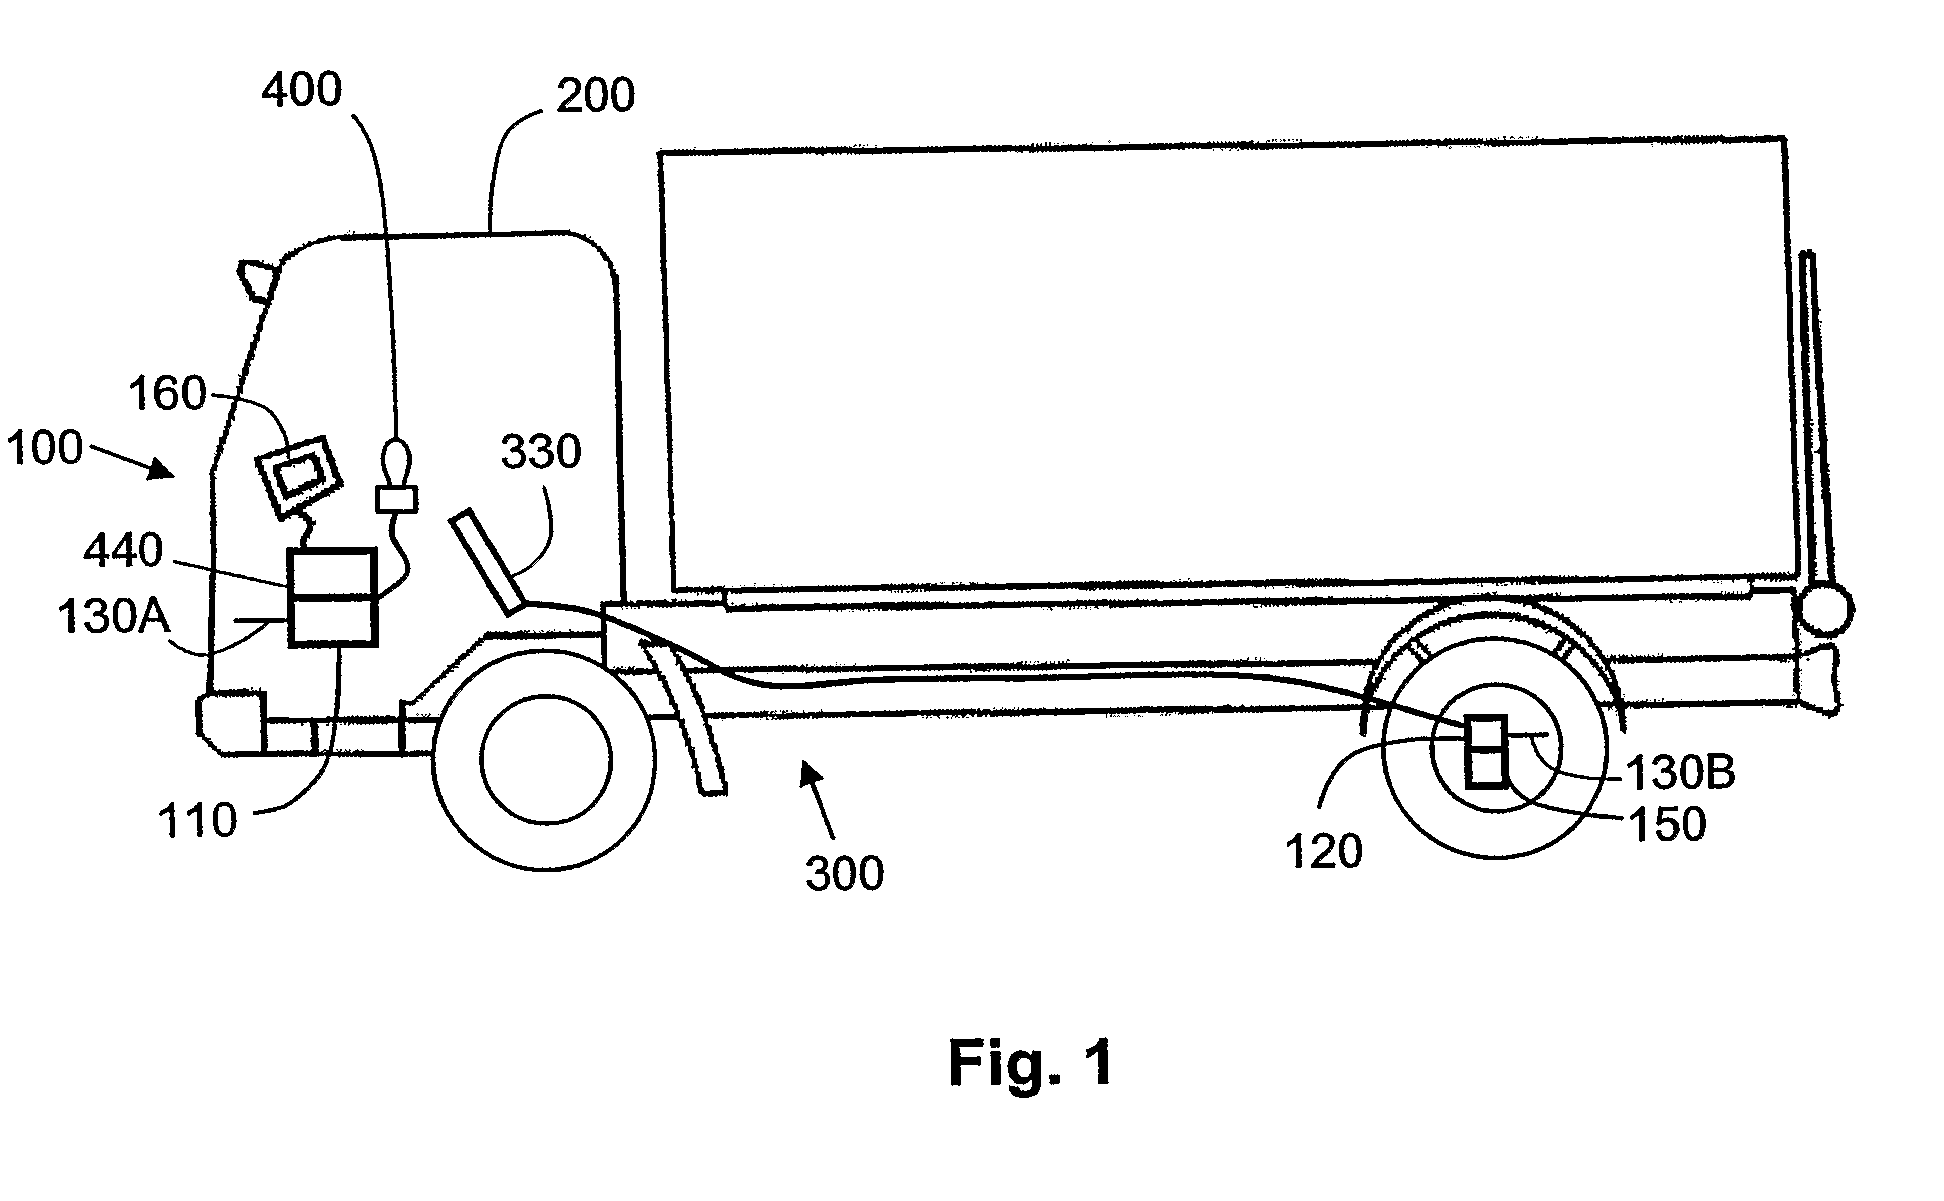 System for automatically actuating the parking brake on a vehicle